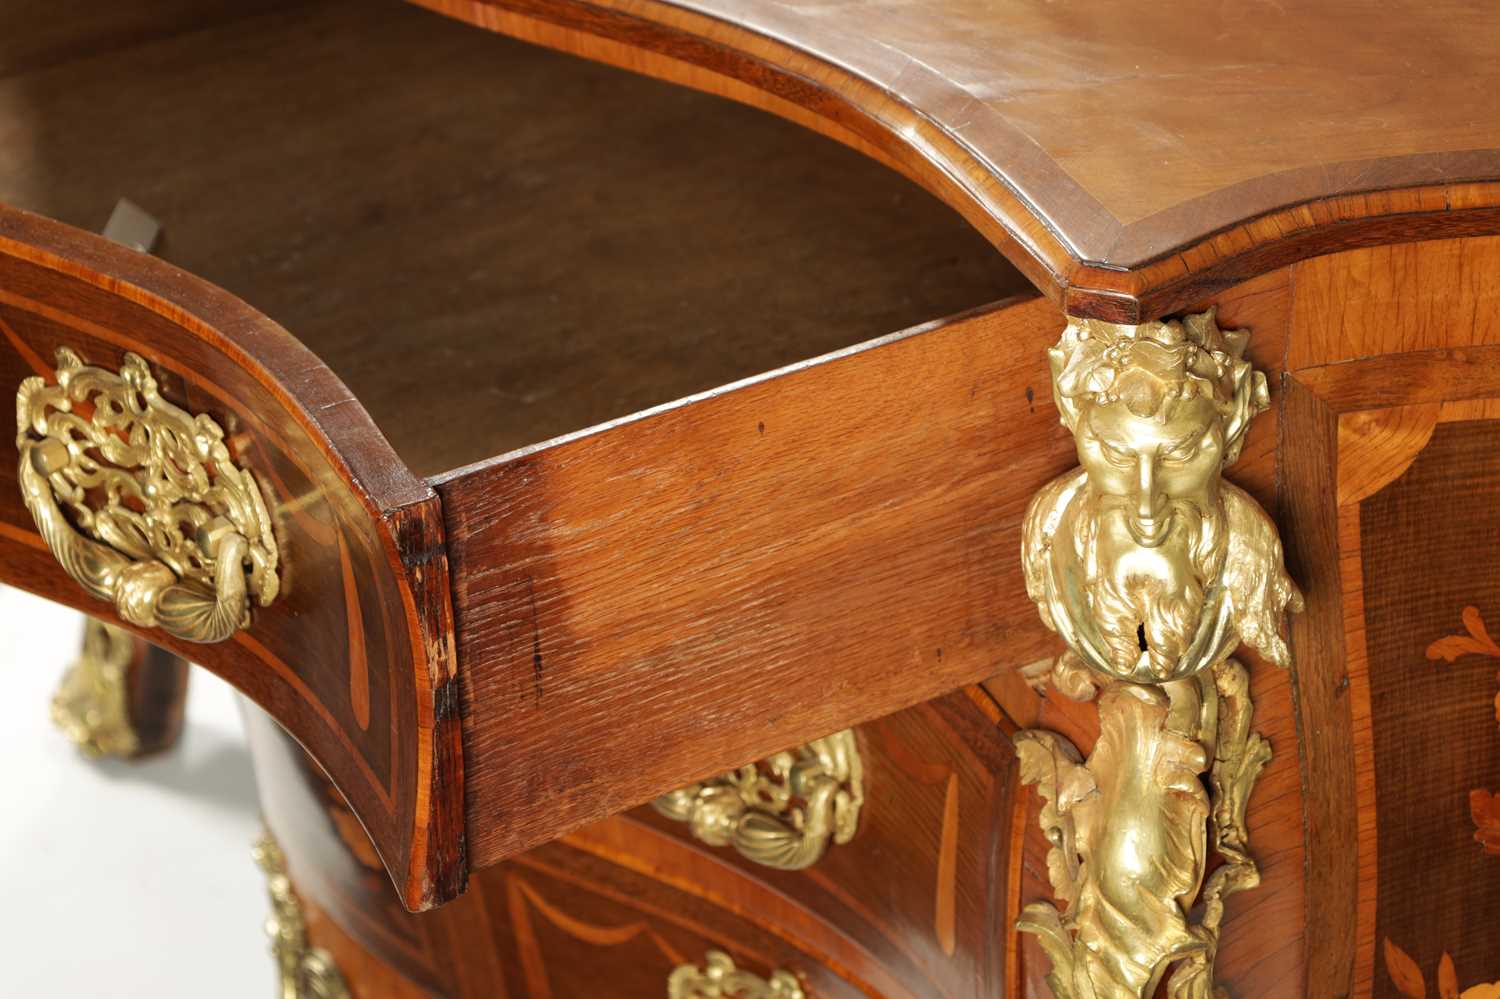 A FINE GEORGE II ENGLISH MARQUETRY COMMODE IN THE MANNER OF HENRY HILL - Image 23 of 23